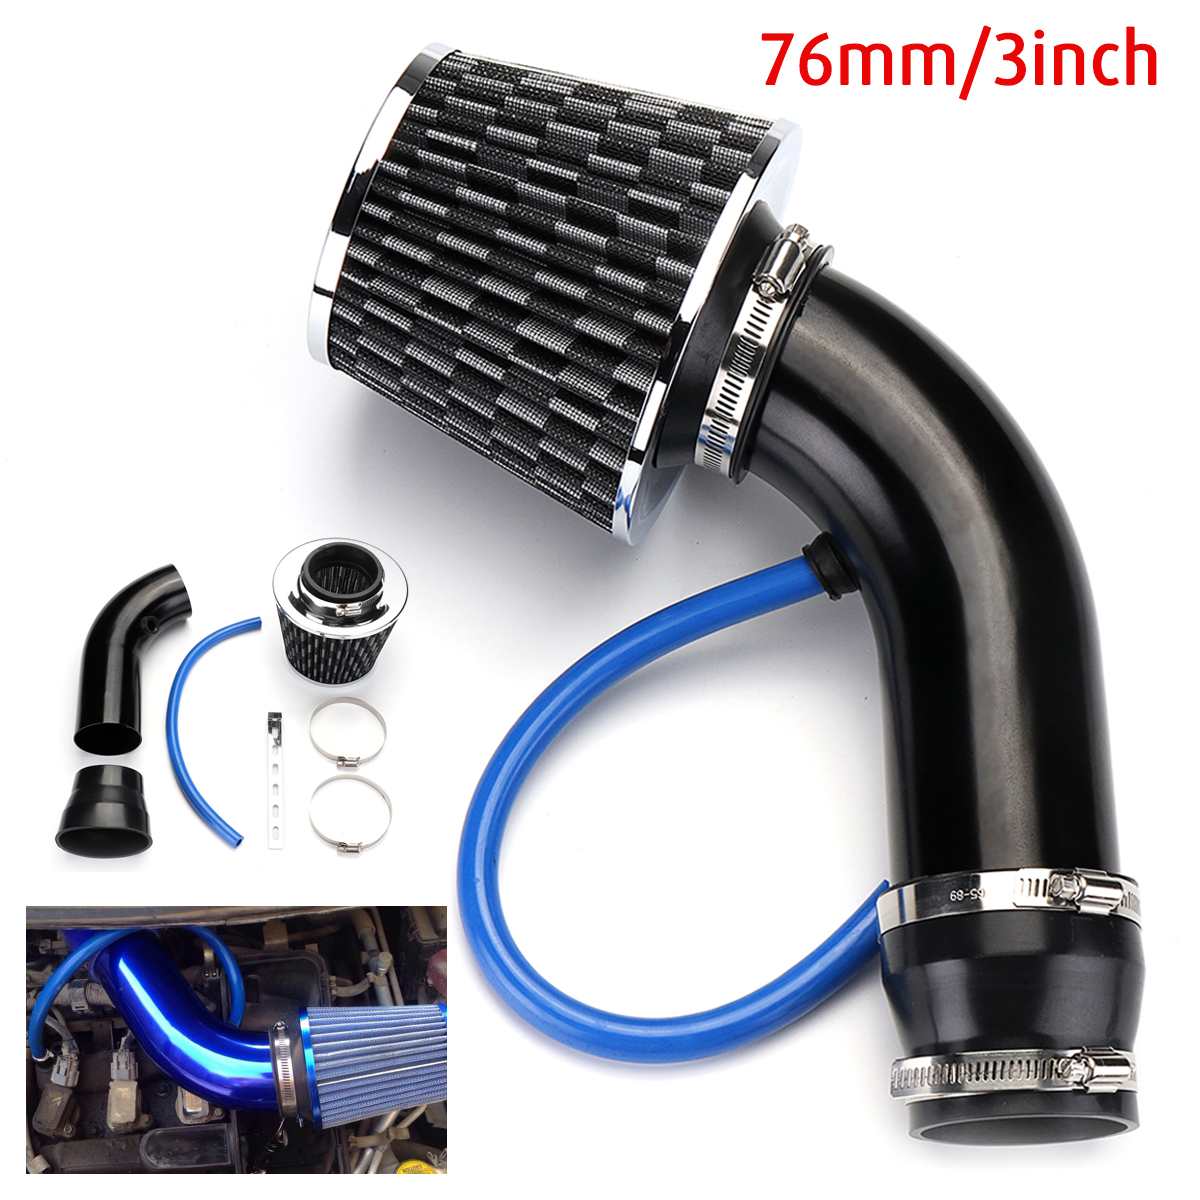 76 Mm 3 Inch Universele Auto Aluminium Luchtaanzuigbuis Kit + Luchtfilter Duct Tube Kit Luchtfilter Prestaties cold Air Intake Kit